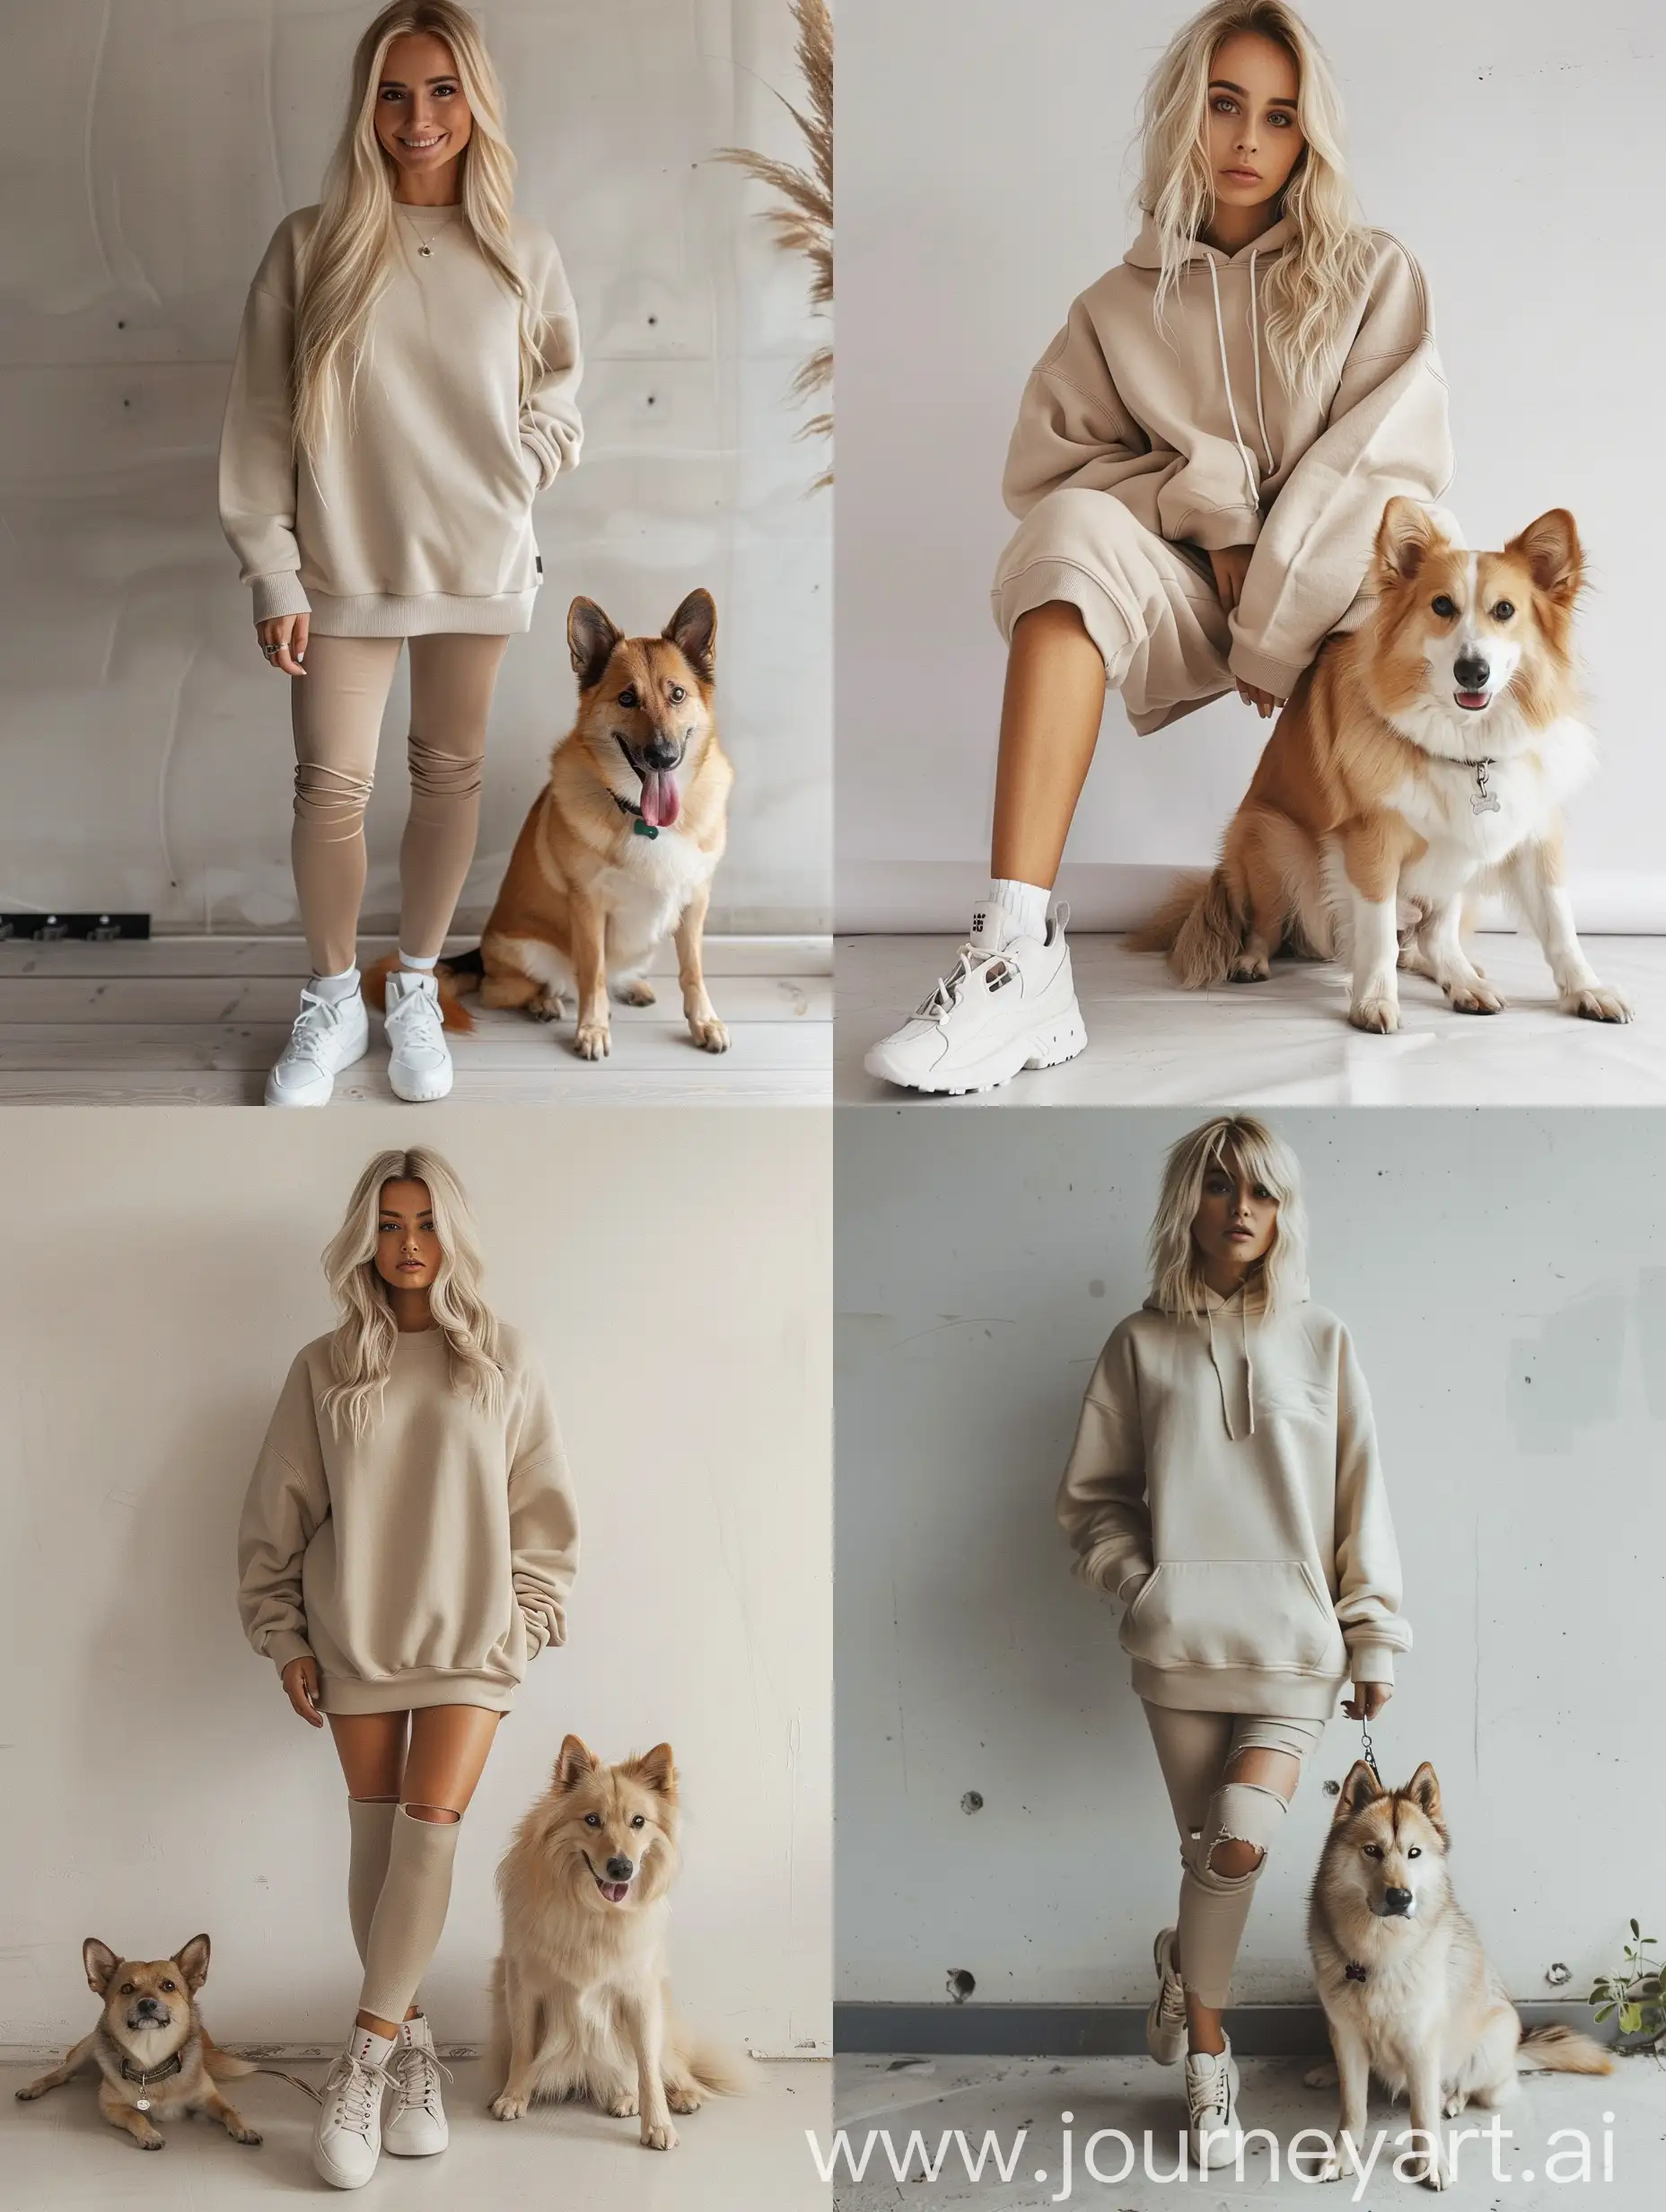 Fashionable-Blonde-Woman-Standing-Tall-in-Beige-Sweatshirt-with-Adorable-Dog